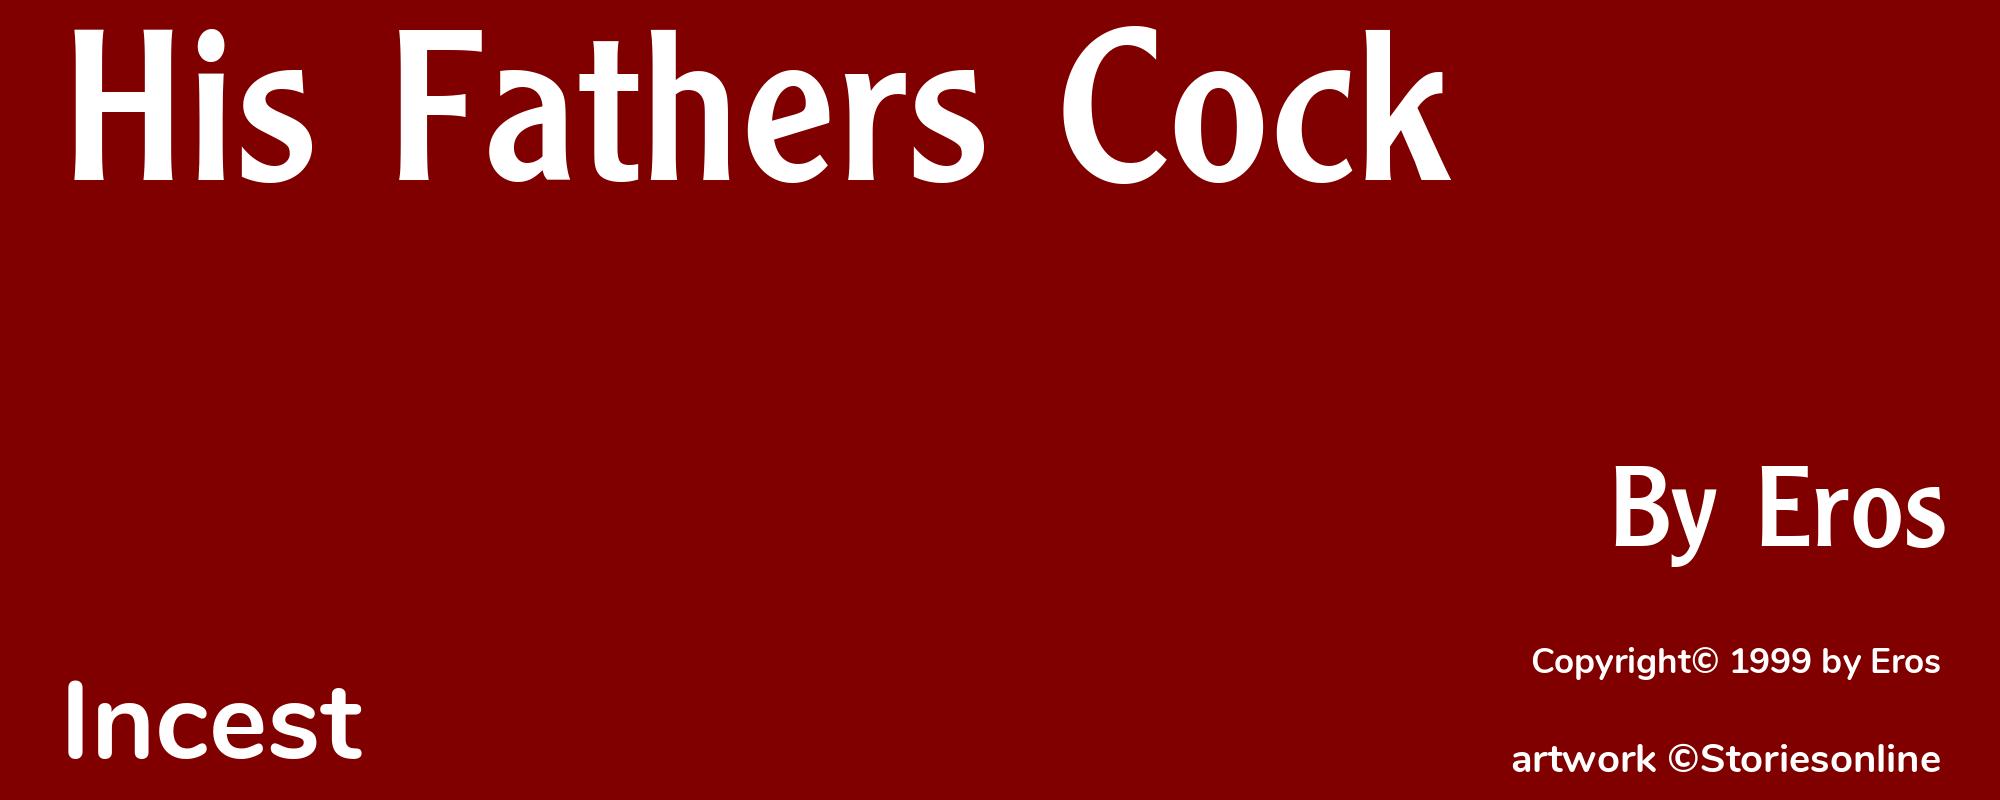 His Fathers Cock - Cover